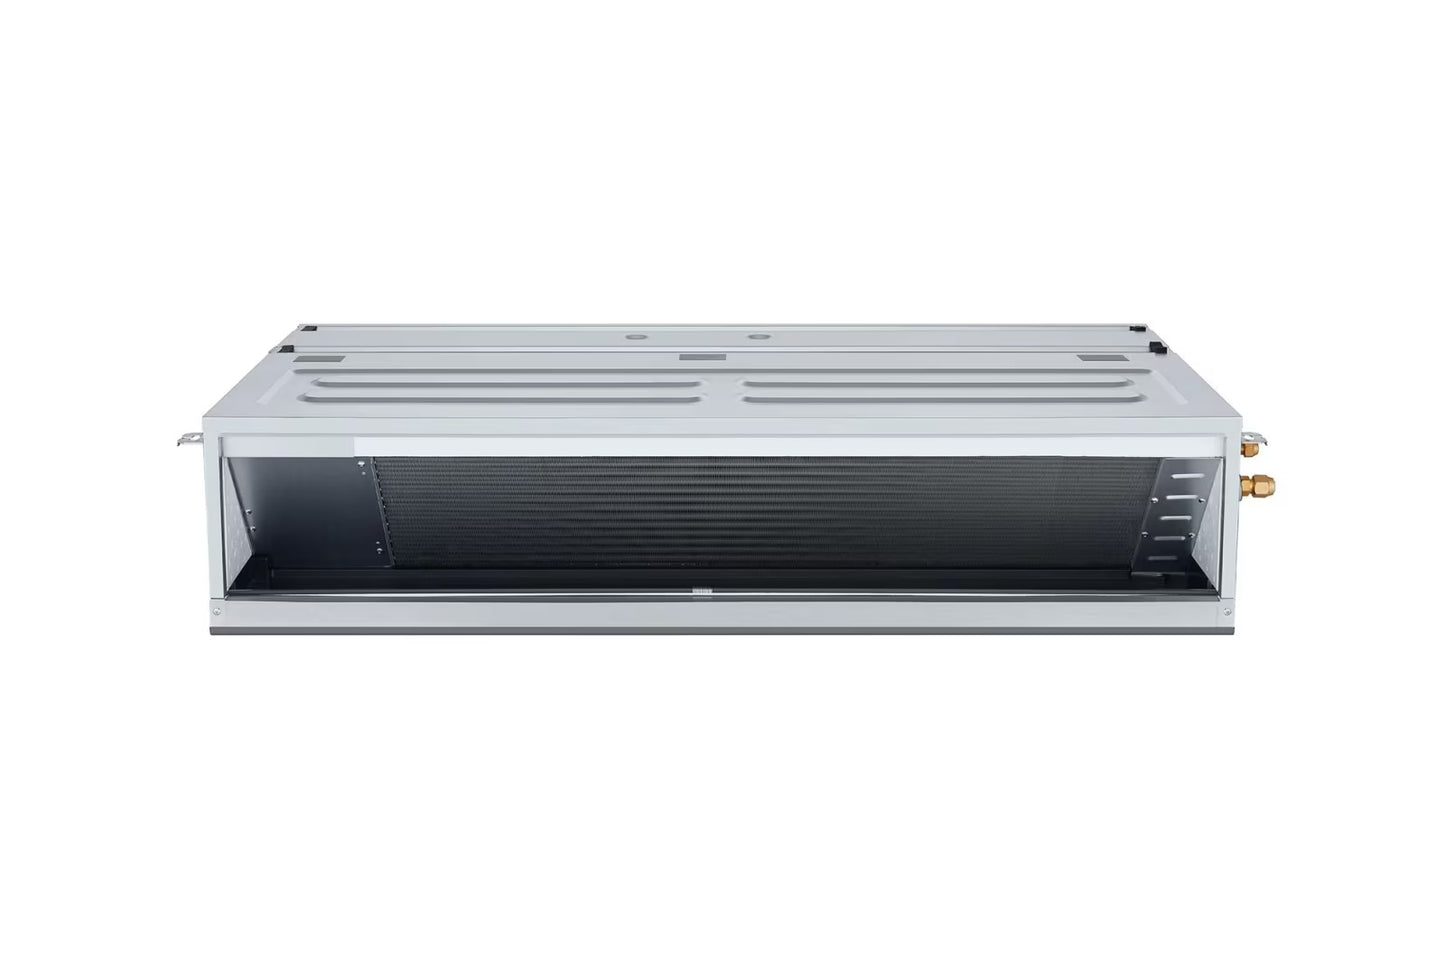 LG Ceiling Concealed Duct INV Unit 15.8KW with High Static and E.S.P. Control for Multiple Rooms - ARNU54GM1A3